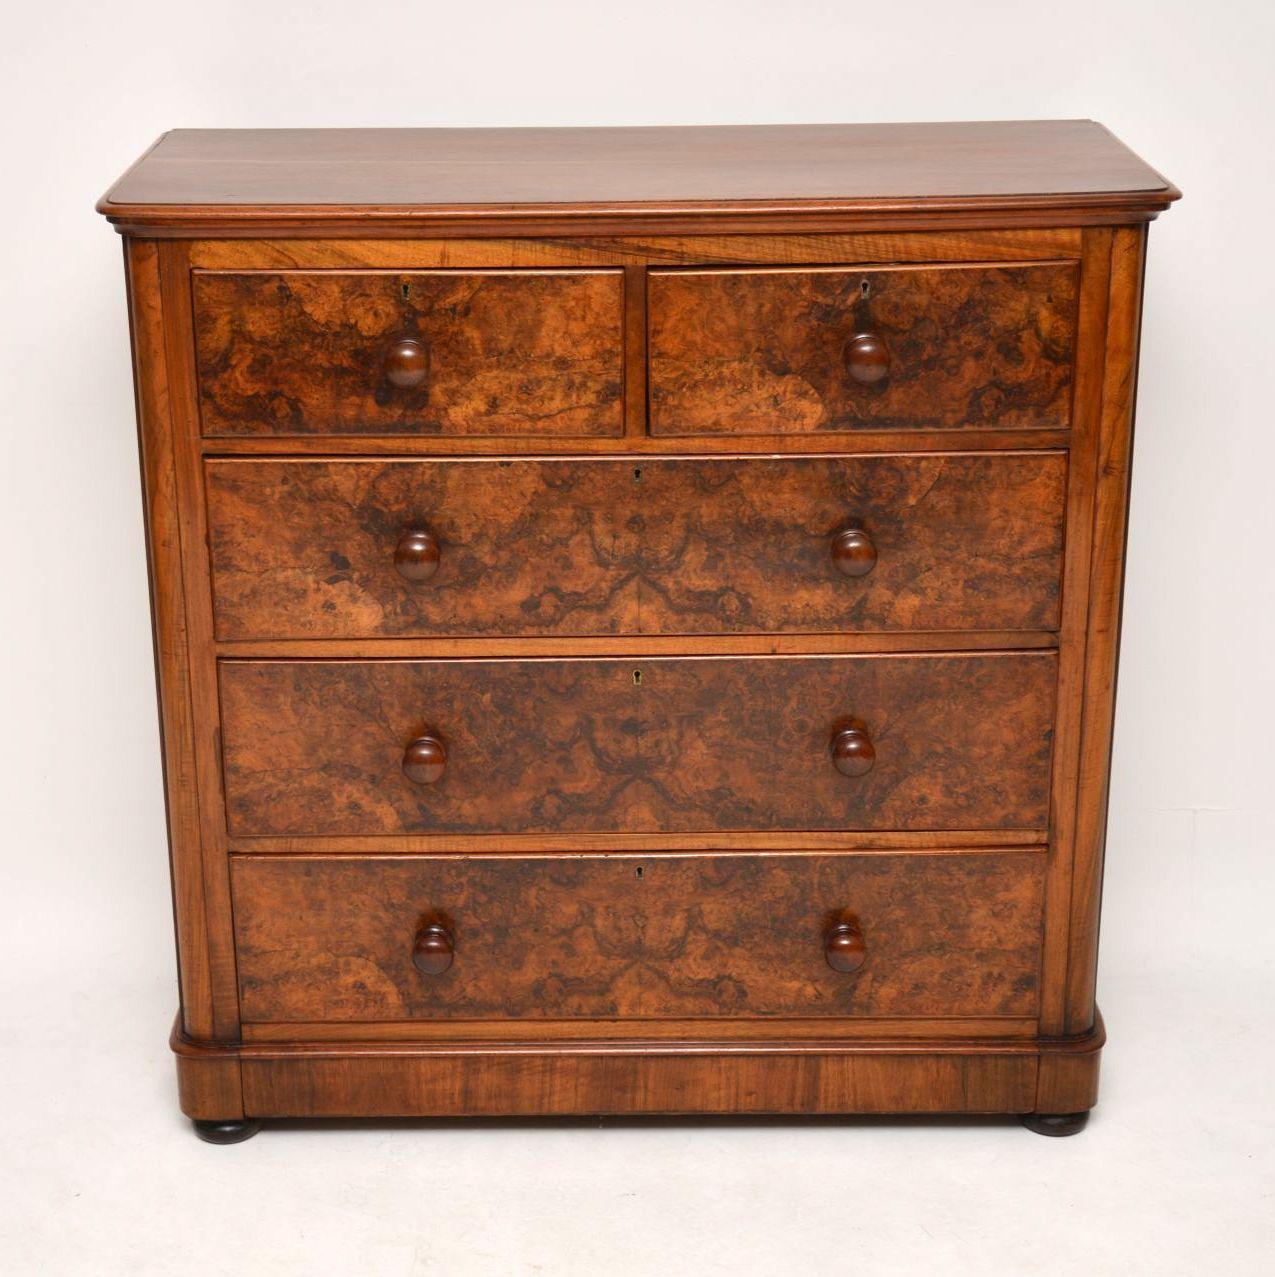 Antique Victorian chests of drawers of this design, size, quality and condition are very hard to find. It's ten times harder to find them in burr walnut and this one is a fabulous example. The burr walnut on the drawer fronts has a really lovely